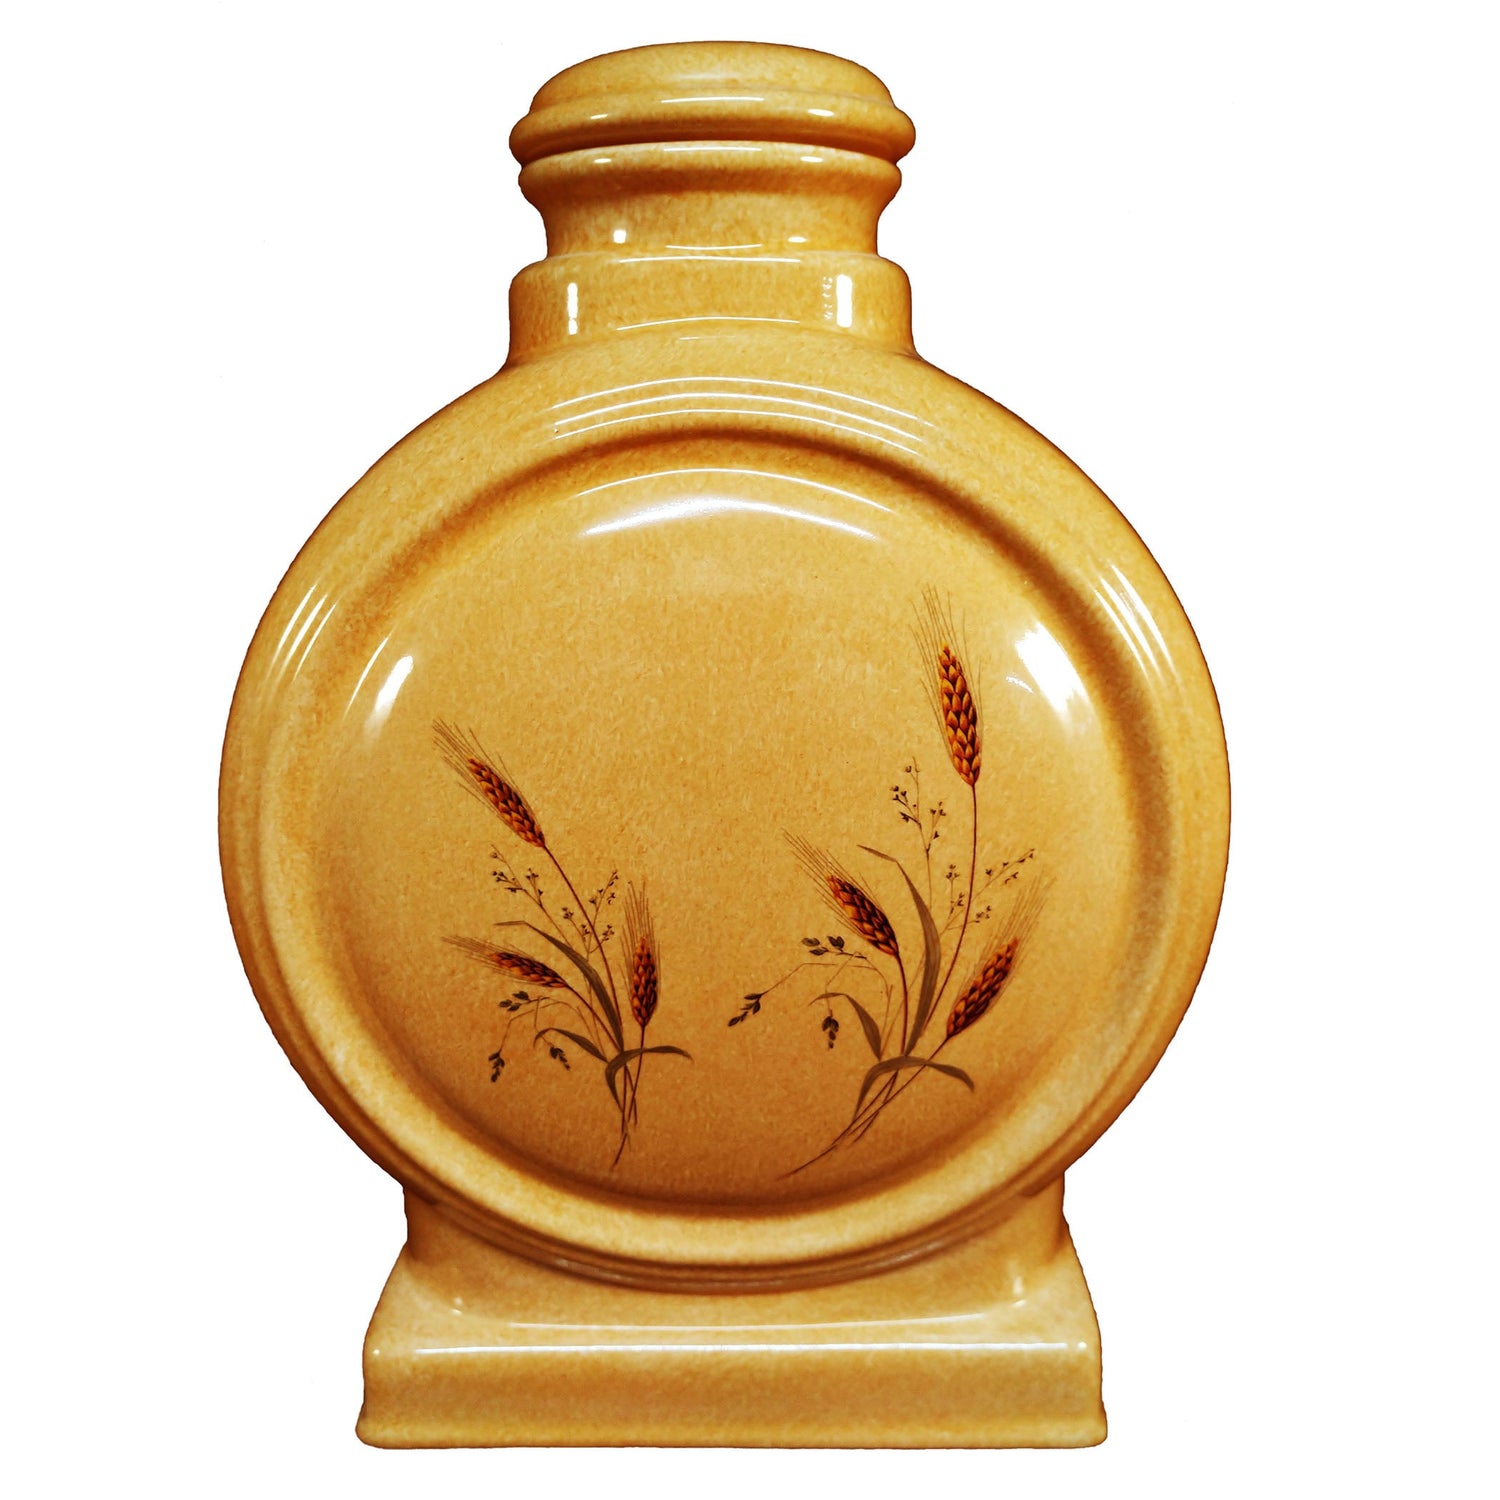 Collection of large cremation urns. This is an urn with wheat stalks. | Heartland Urns and Keepsakes